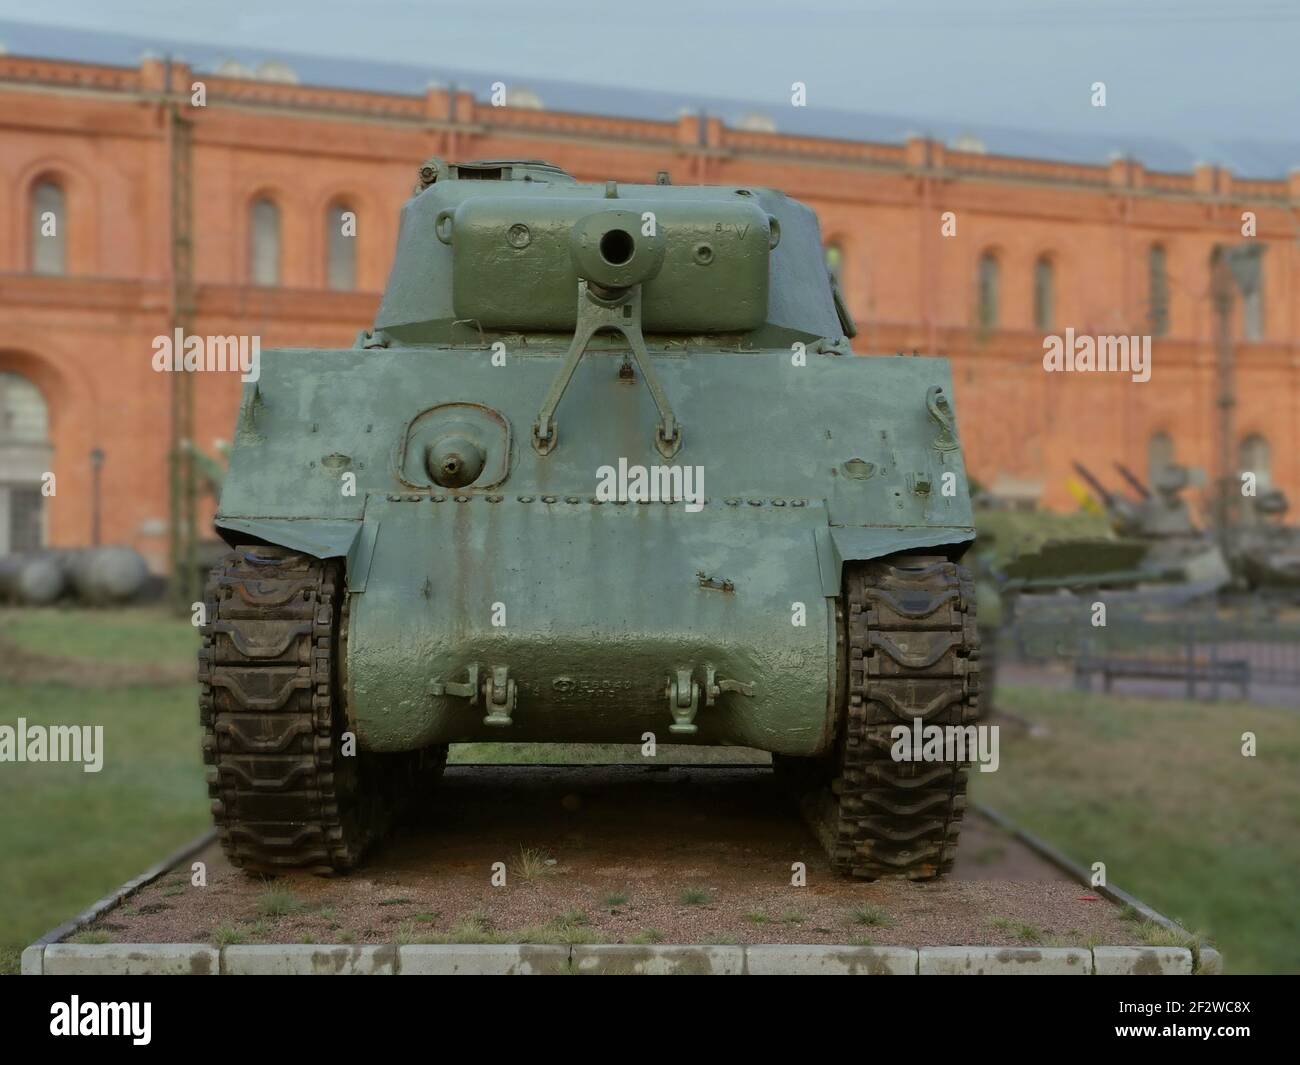 cannon heavy American tank Sherman front view, fought in World War II Stock Photo